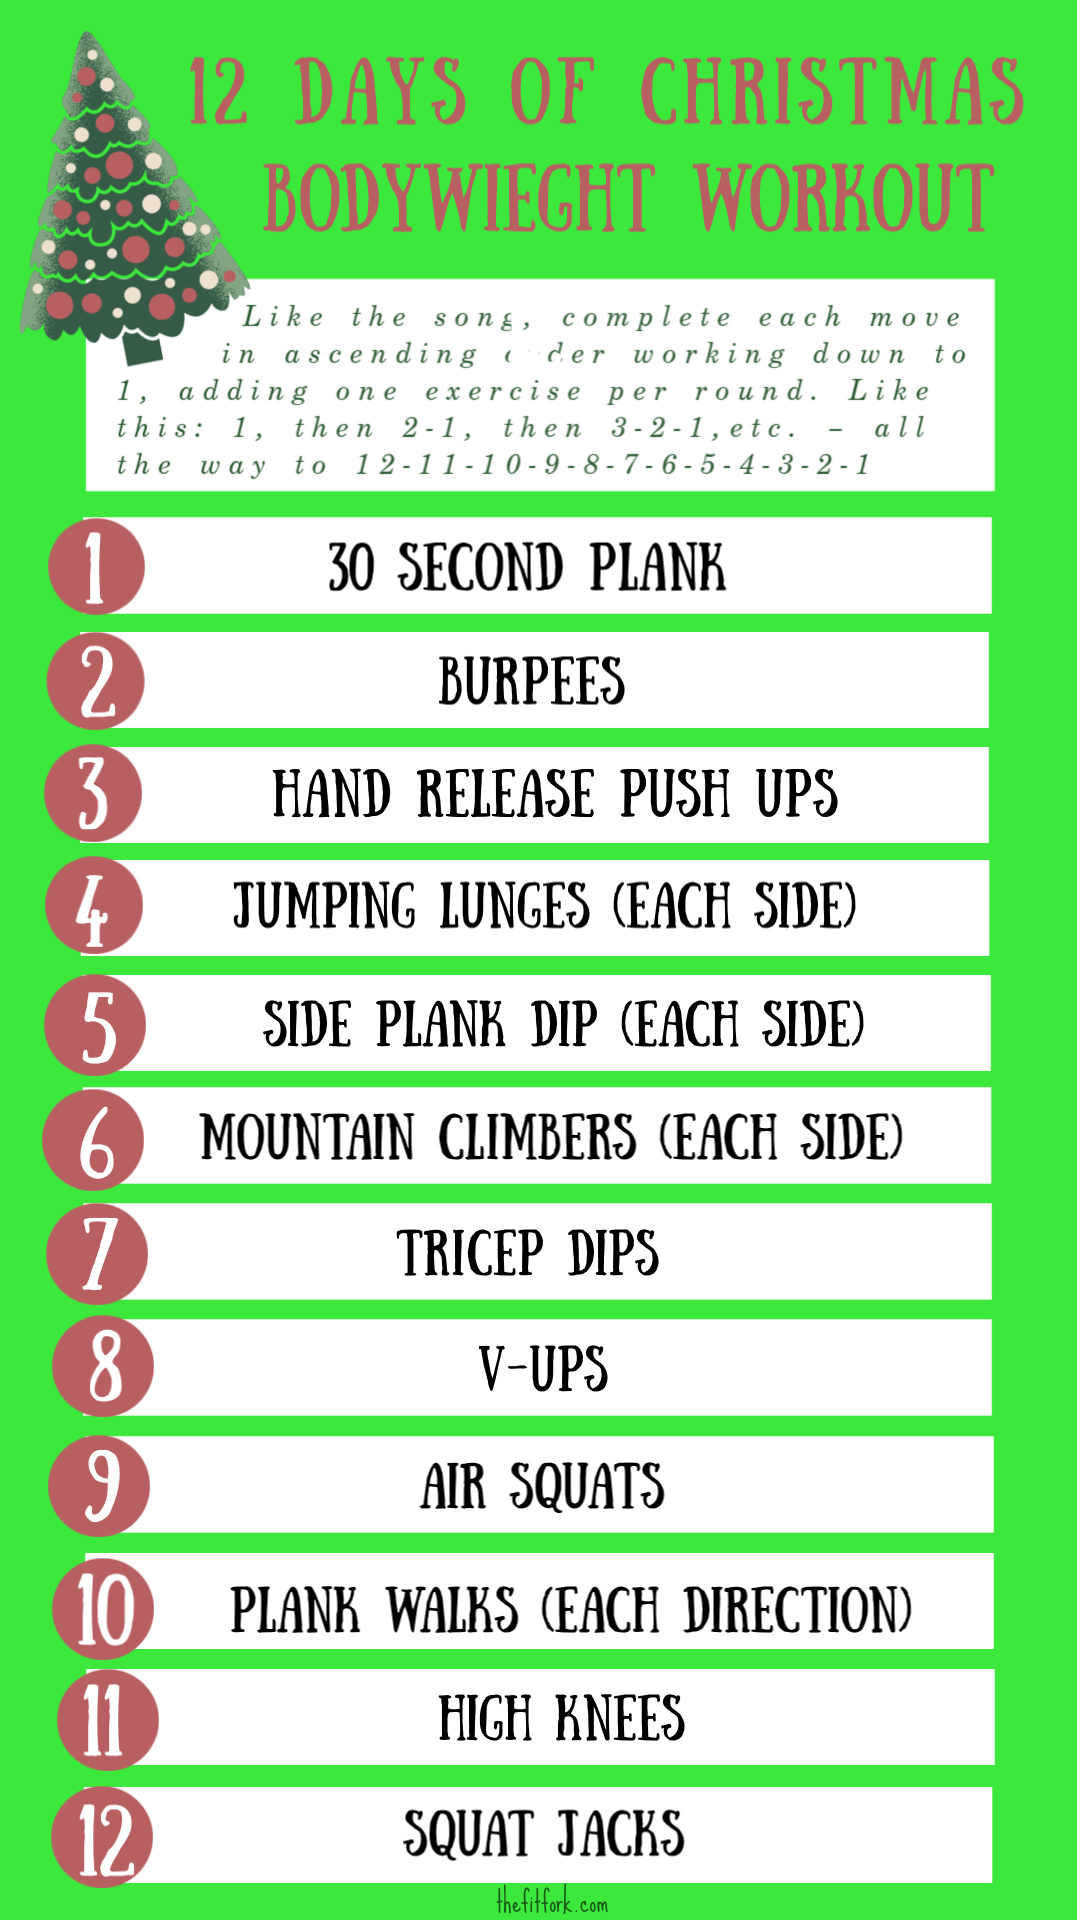 12 Days of Christmas Bodyweight Workout is perfect for a full-body, no-equipment-needed WOD when traveling to relatives, in a hotel or otherwise on vacation! 